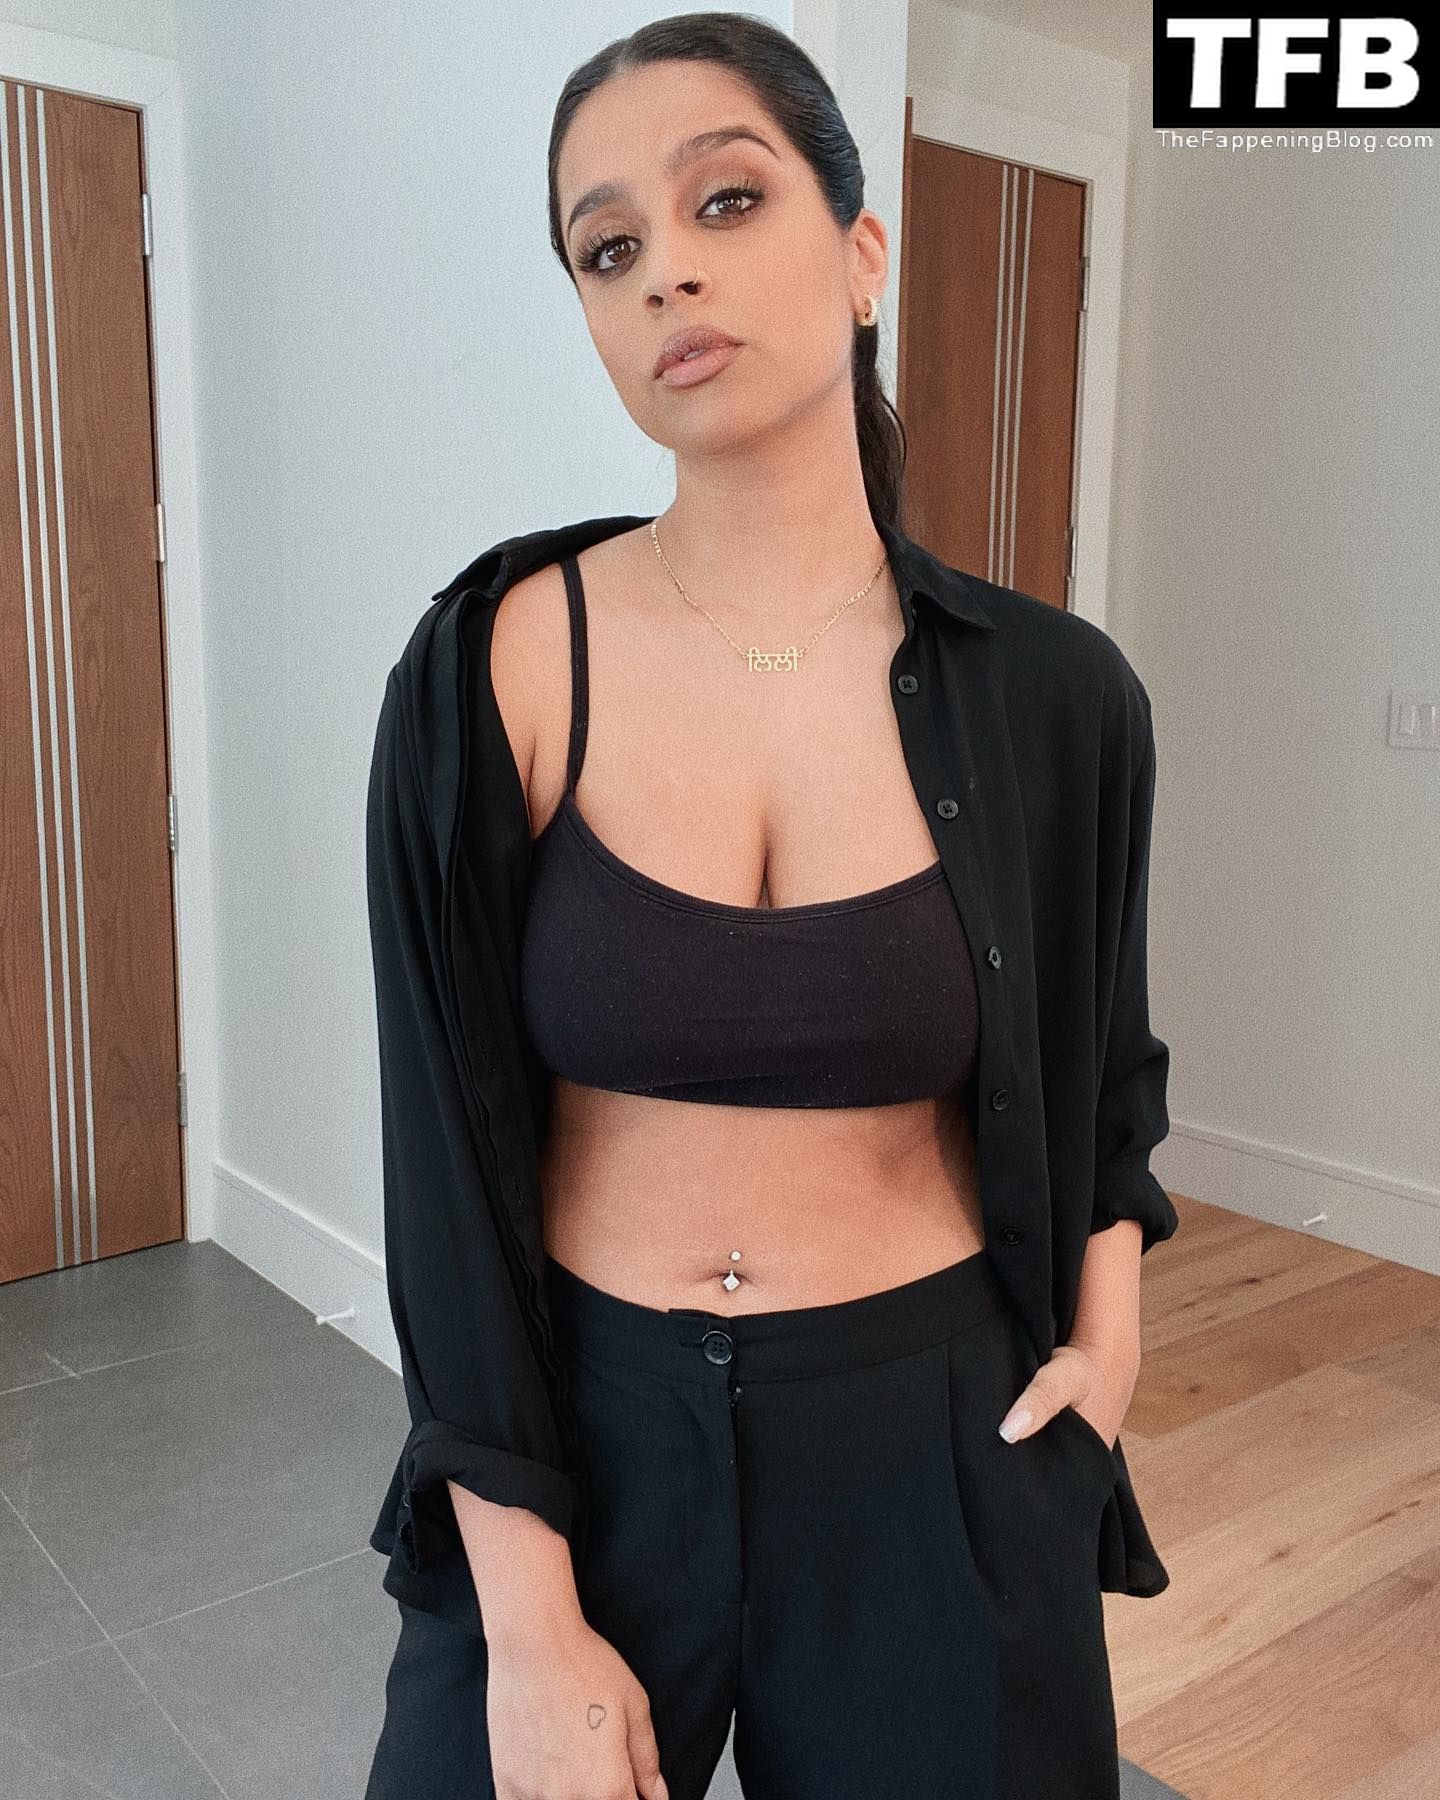 Lilly Singh Topless Sexy 37 thefappeningblog.com  - Lilly Singh Topless & Sexy Collection (89 Photos)